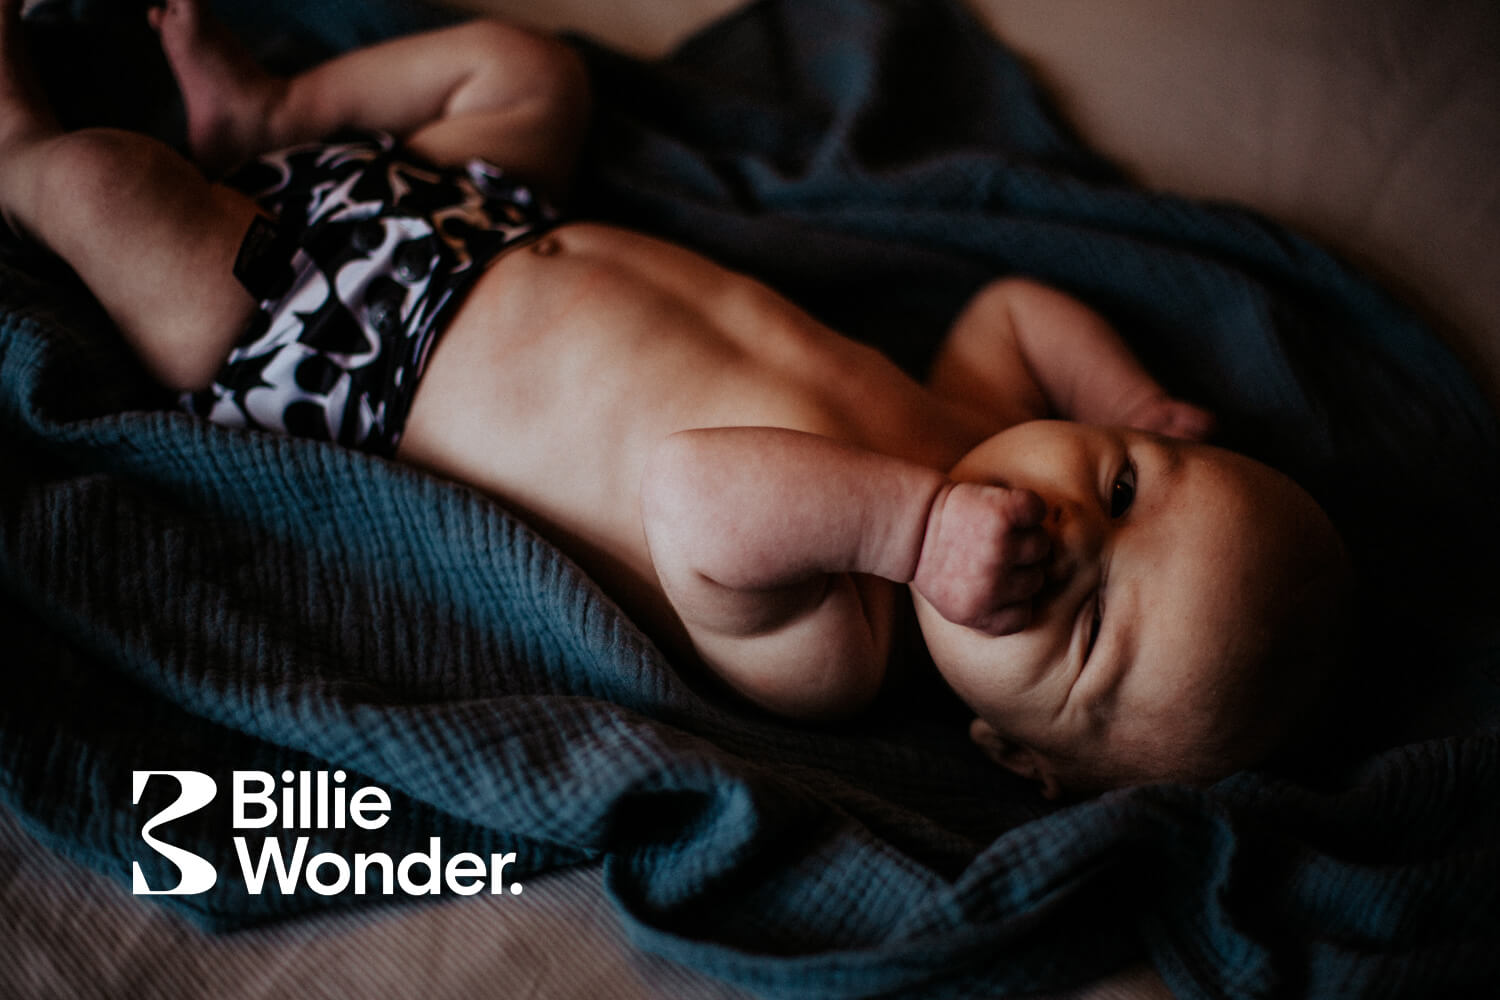 Billie Wonder helps you to reduce waste production with washable diapers in an easy and stylish way